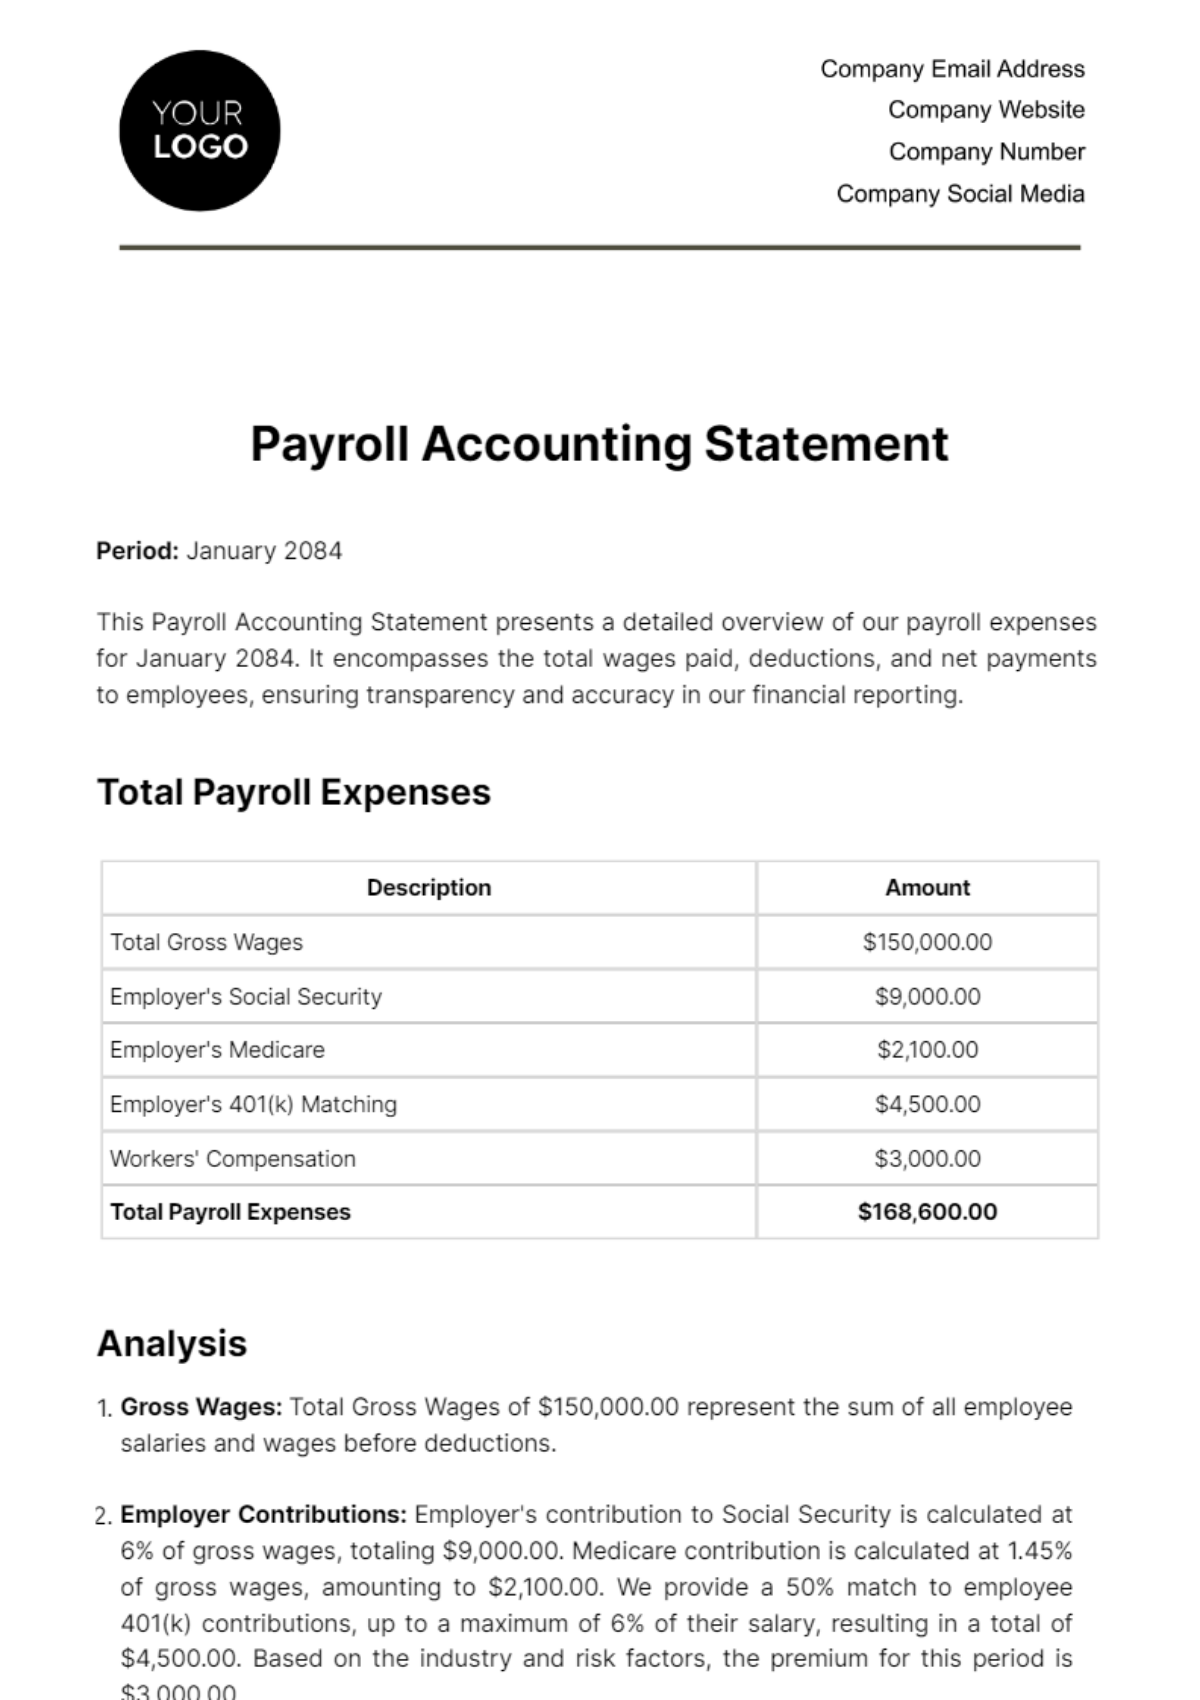 Payroll Accounting Statement Template